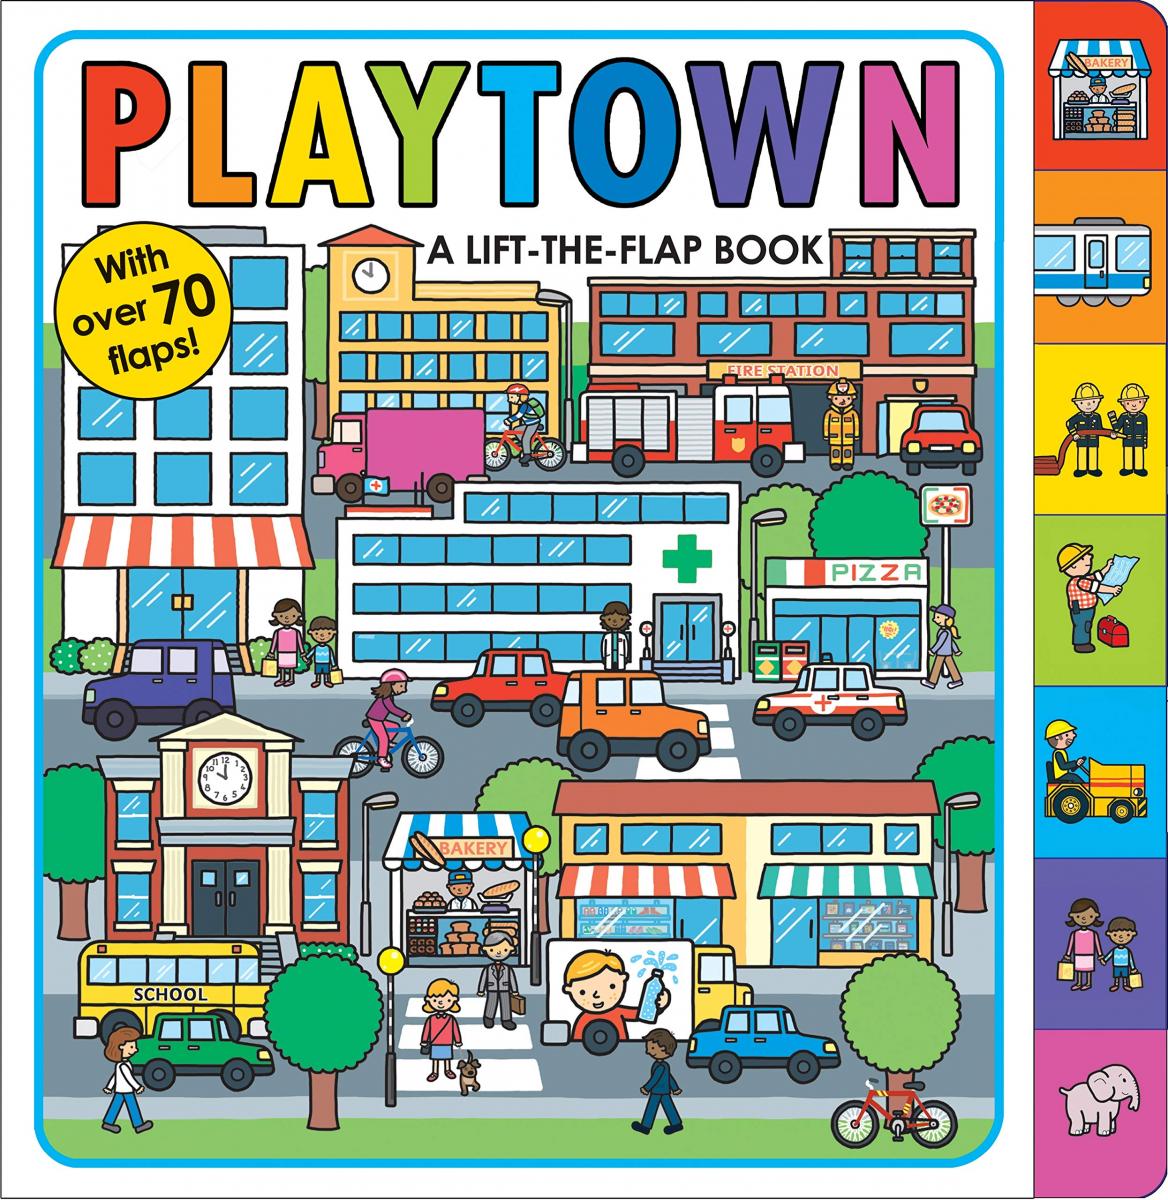 Lift-the-Flap book. Roger Priddy books. Playtown картинки. Priddy Roger "Playtown: Farm".